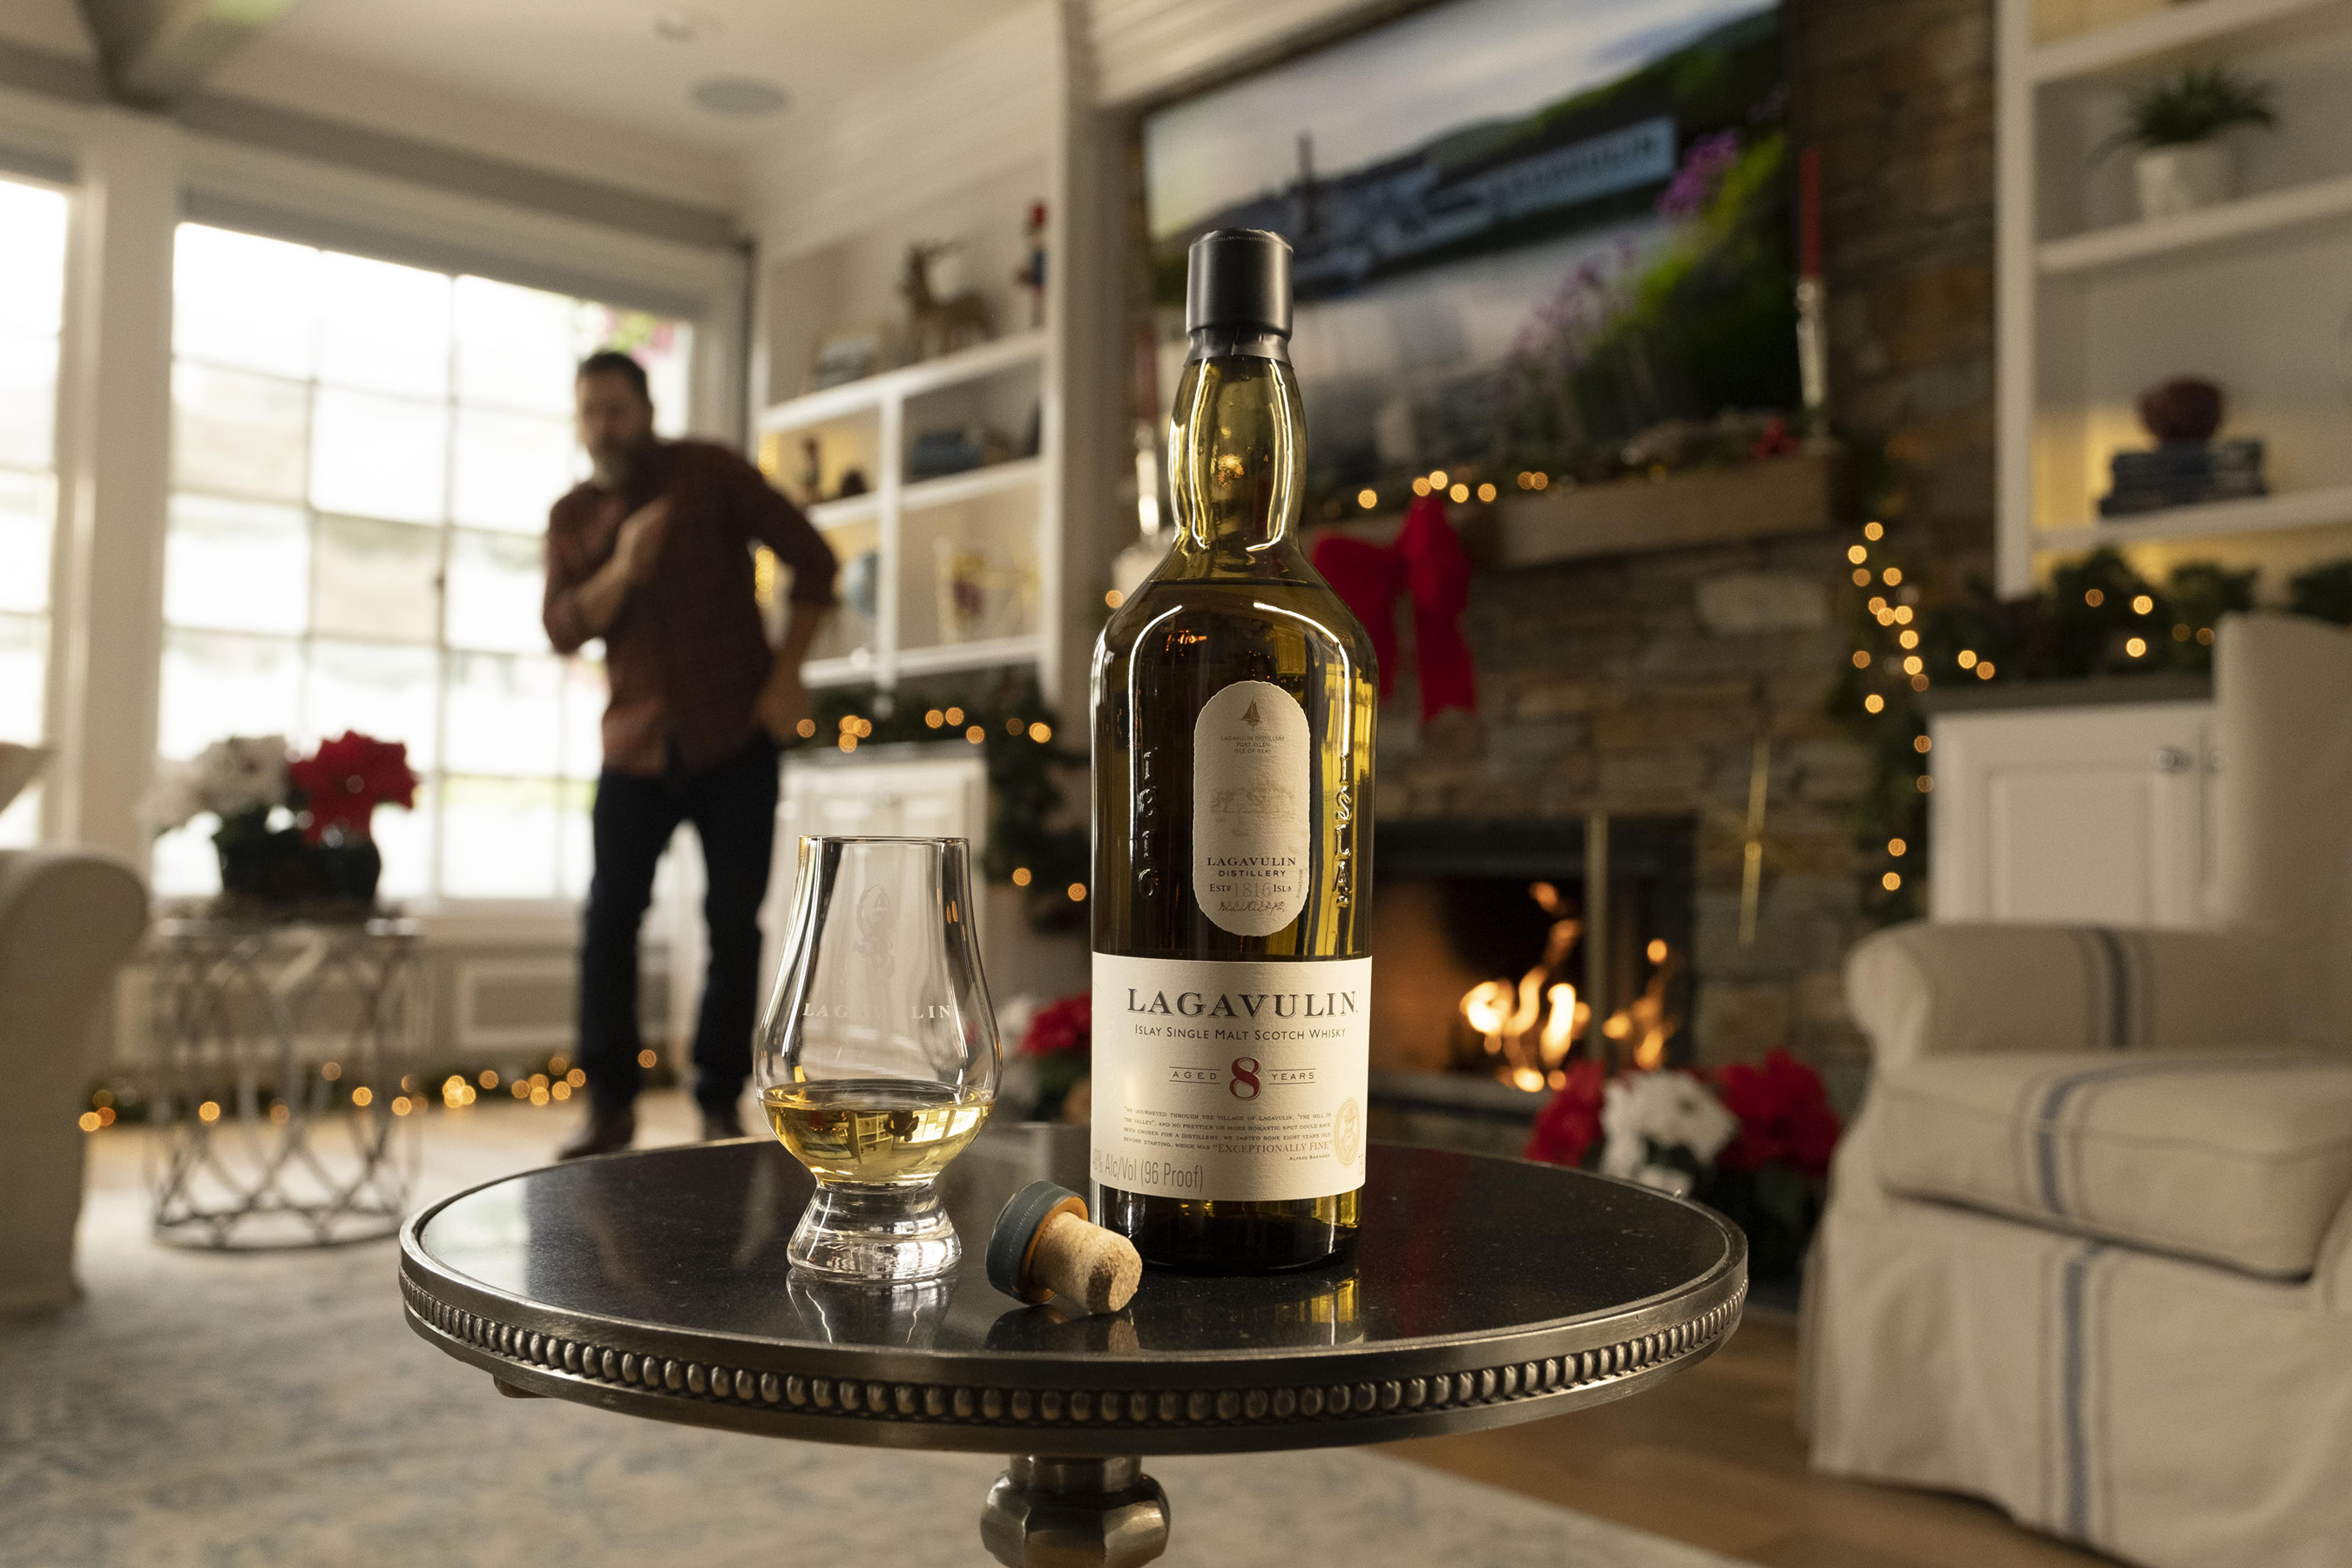 The Newest Video in the ‘Lagavulin: My Tales of Whisky’ Series Toasts to a New Form of Holiday Entertainment